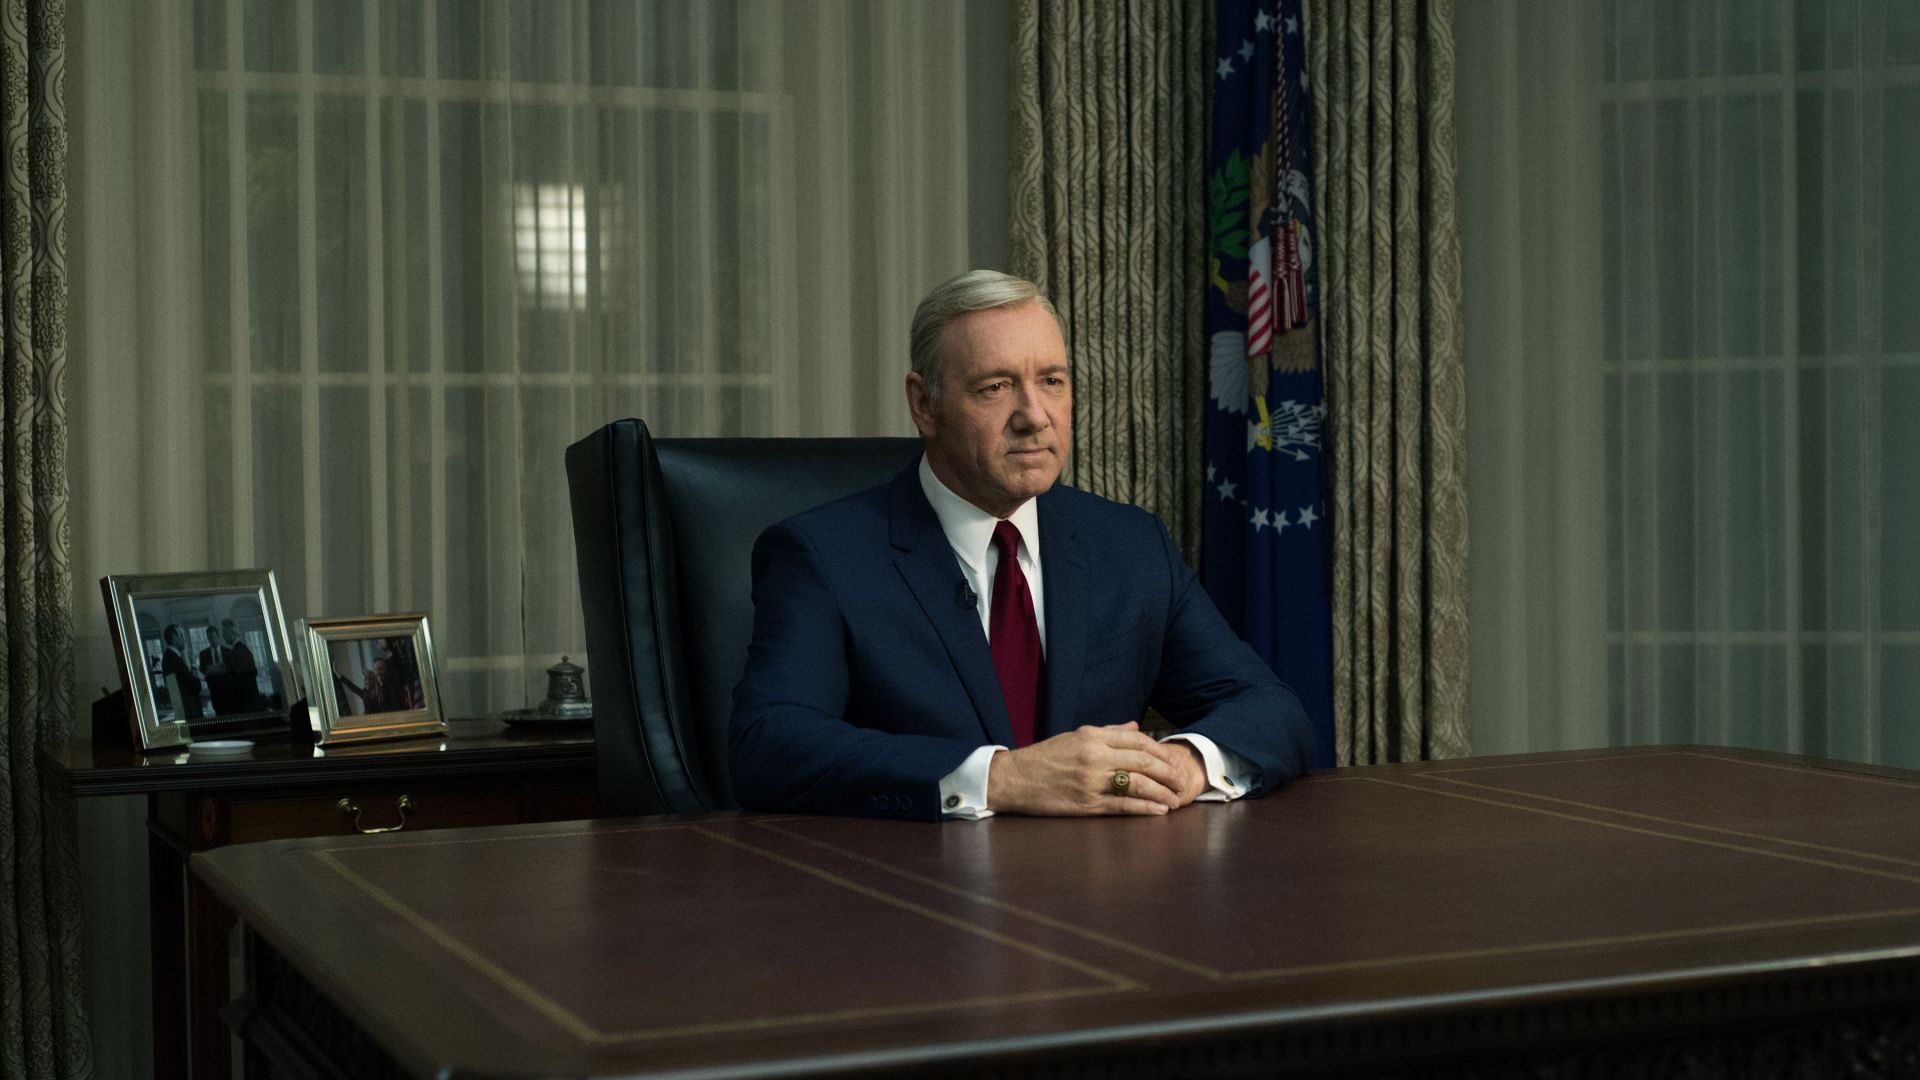 House of Cards, Best TV Series 2016, series, political, Kevin Spacey, Robin Wright, season 4, streaming, HD (horizontal)